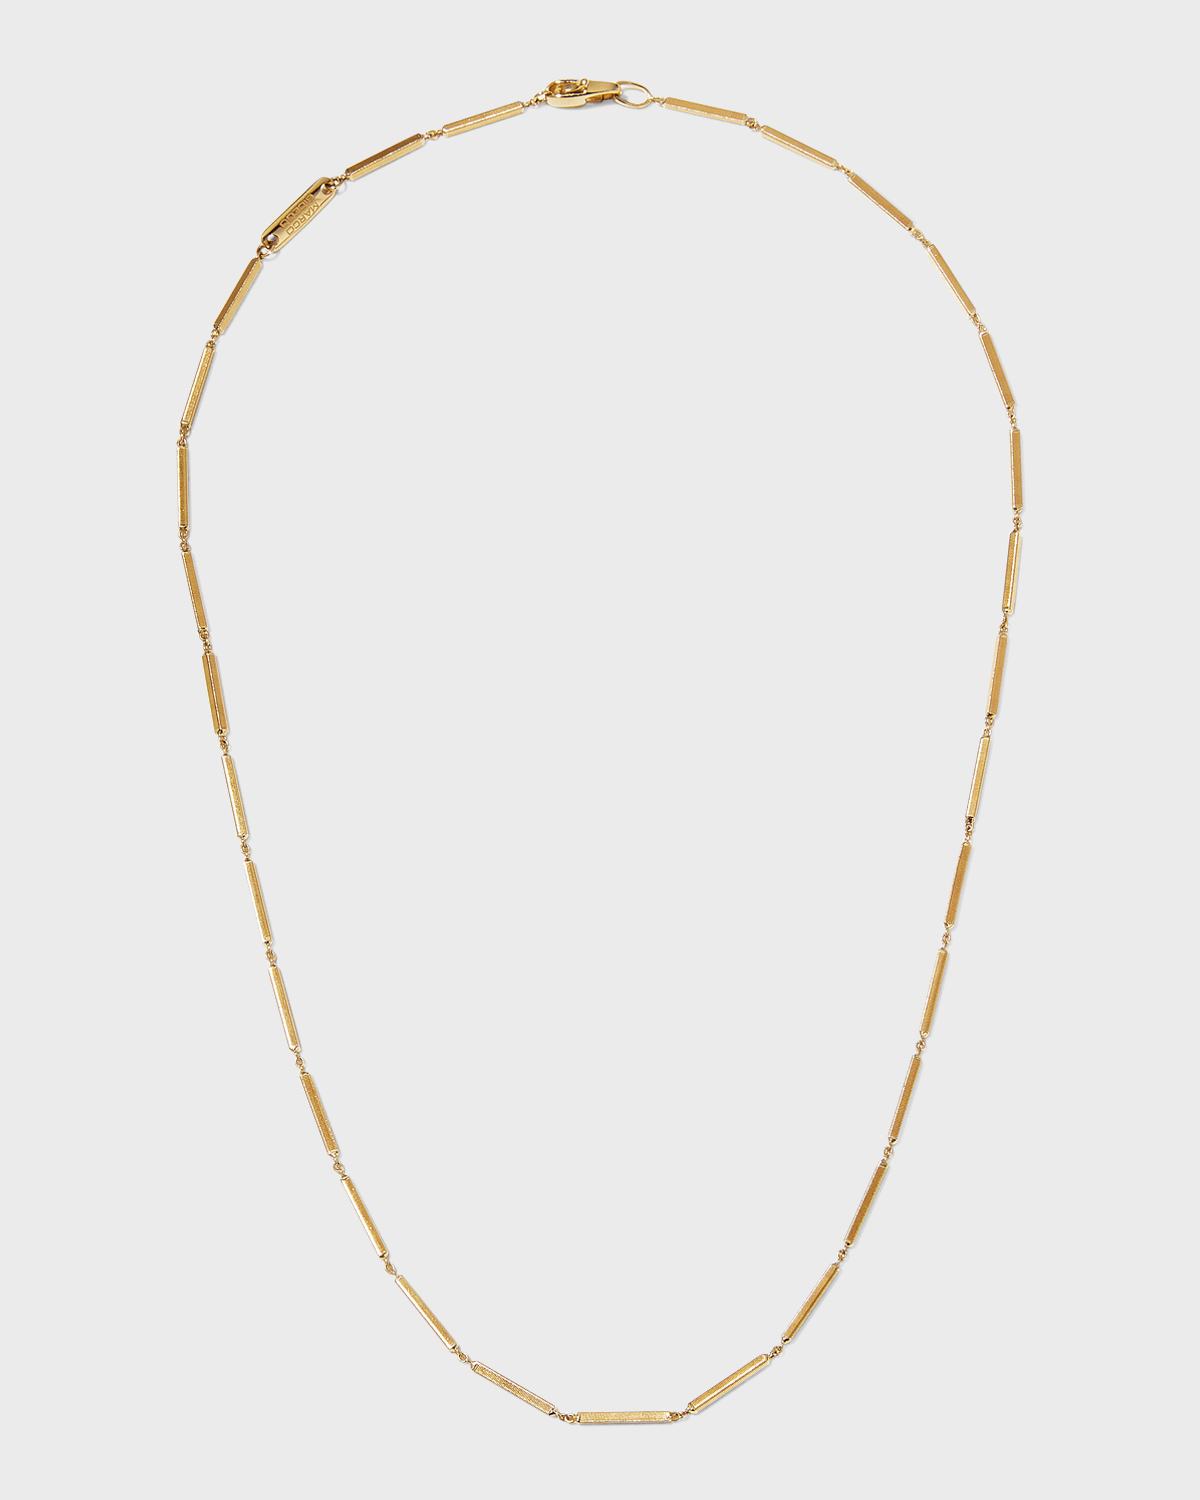 Marco Bicego 18k Unisex Uomo Coiled Station Link Necklace